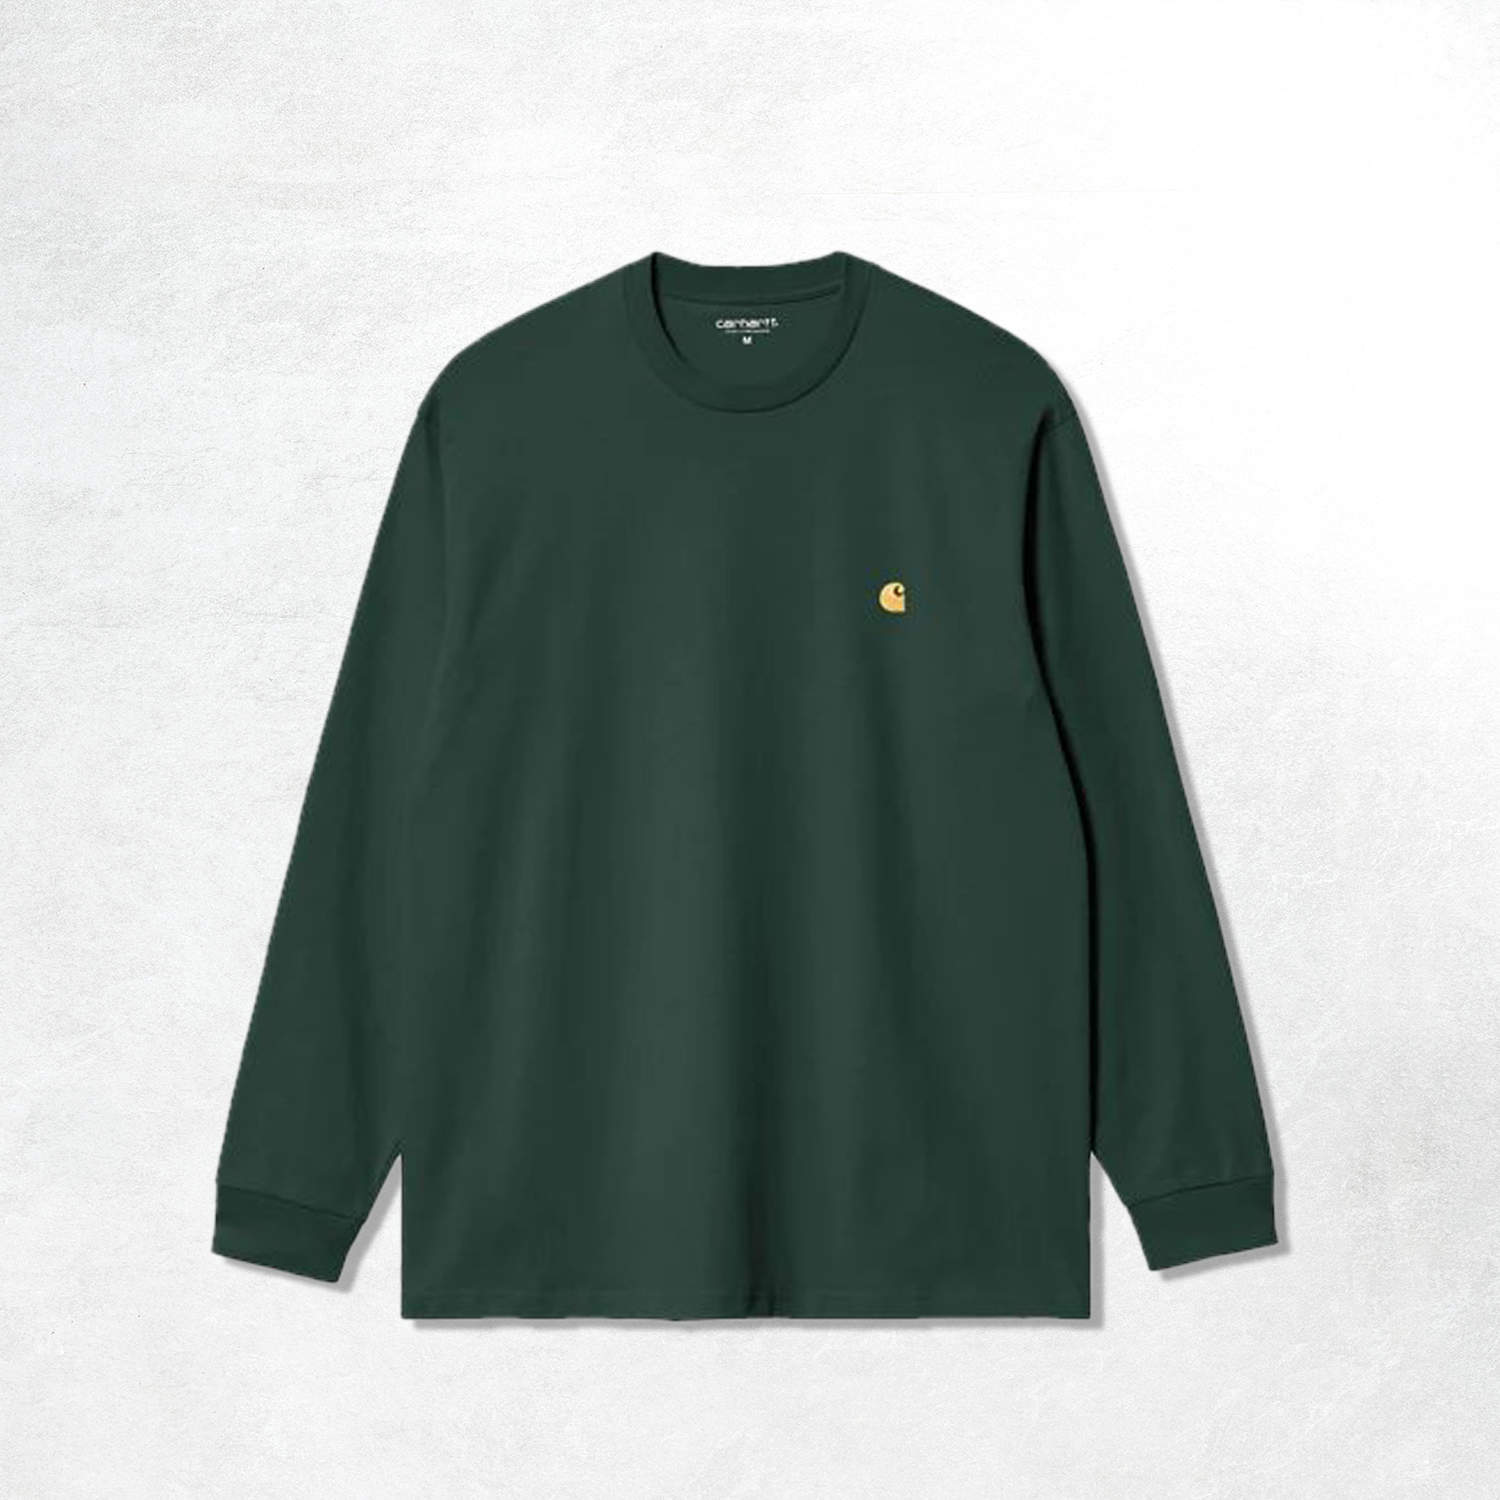 Carhartt WIP L/S Chase T-Shirt: Discovery Green/Gold.1